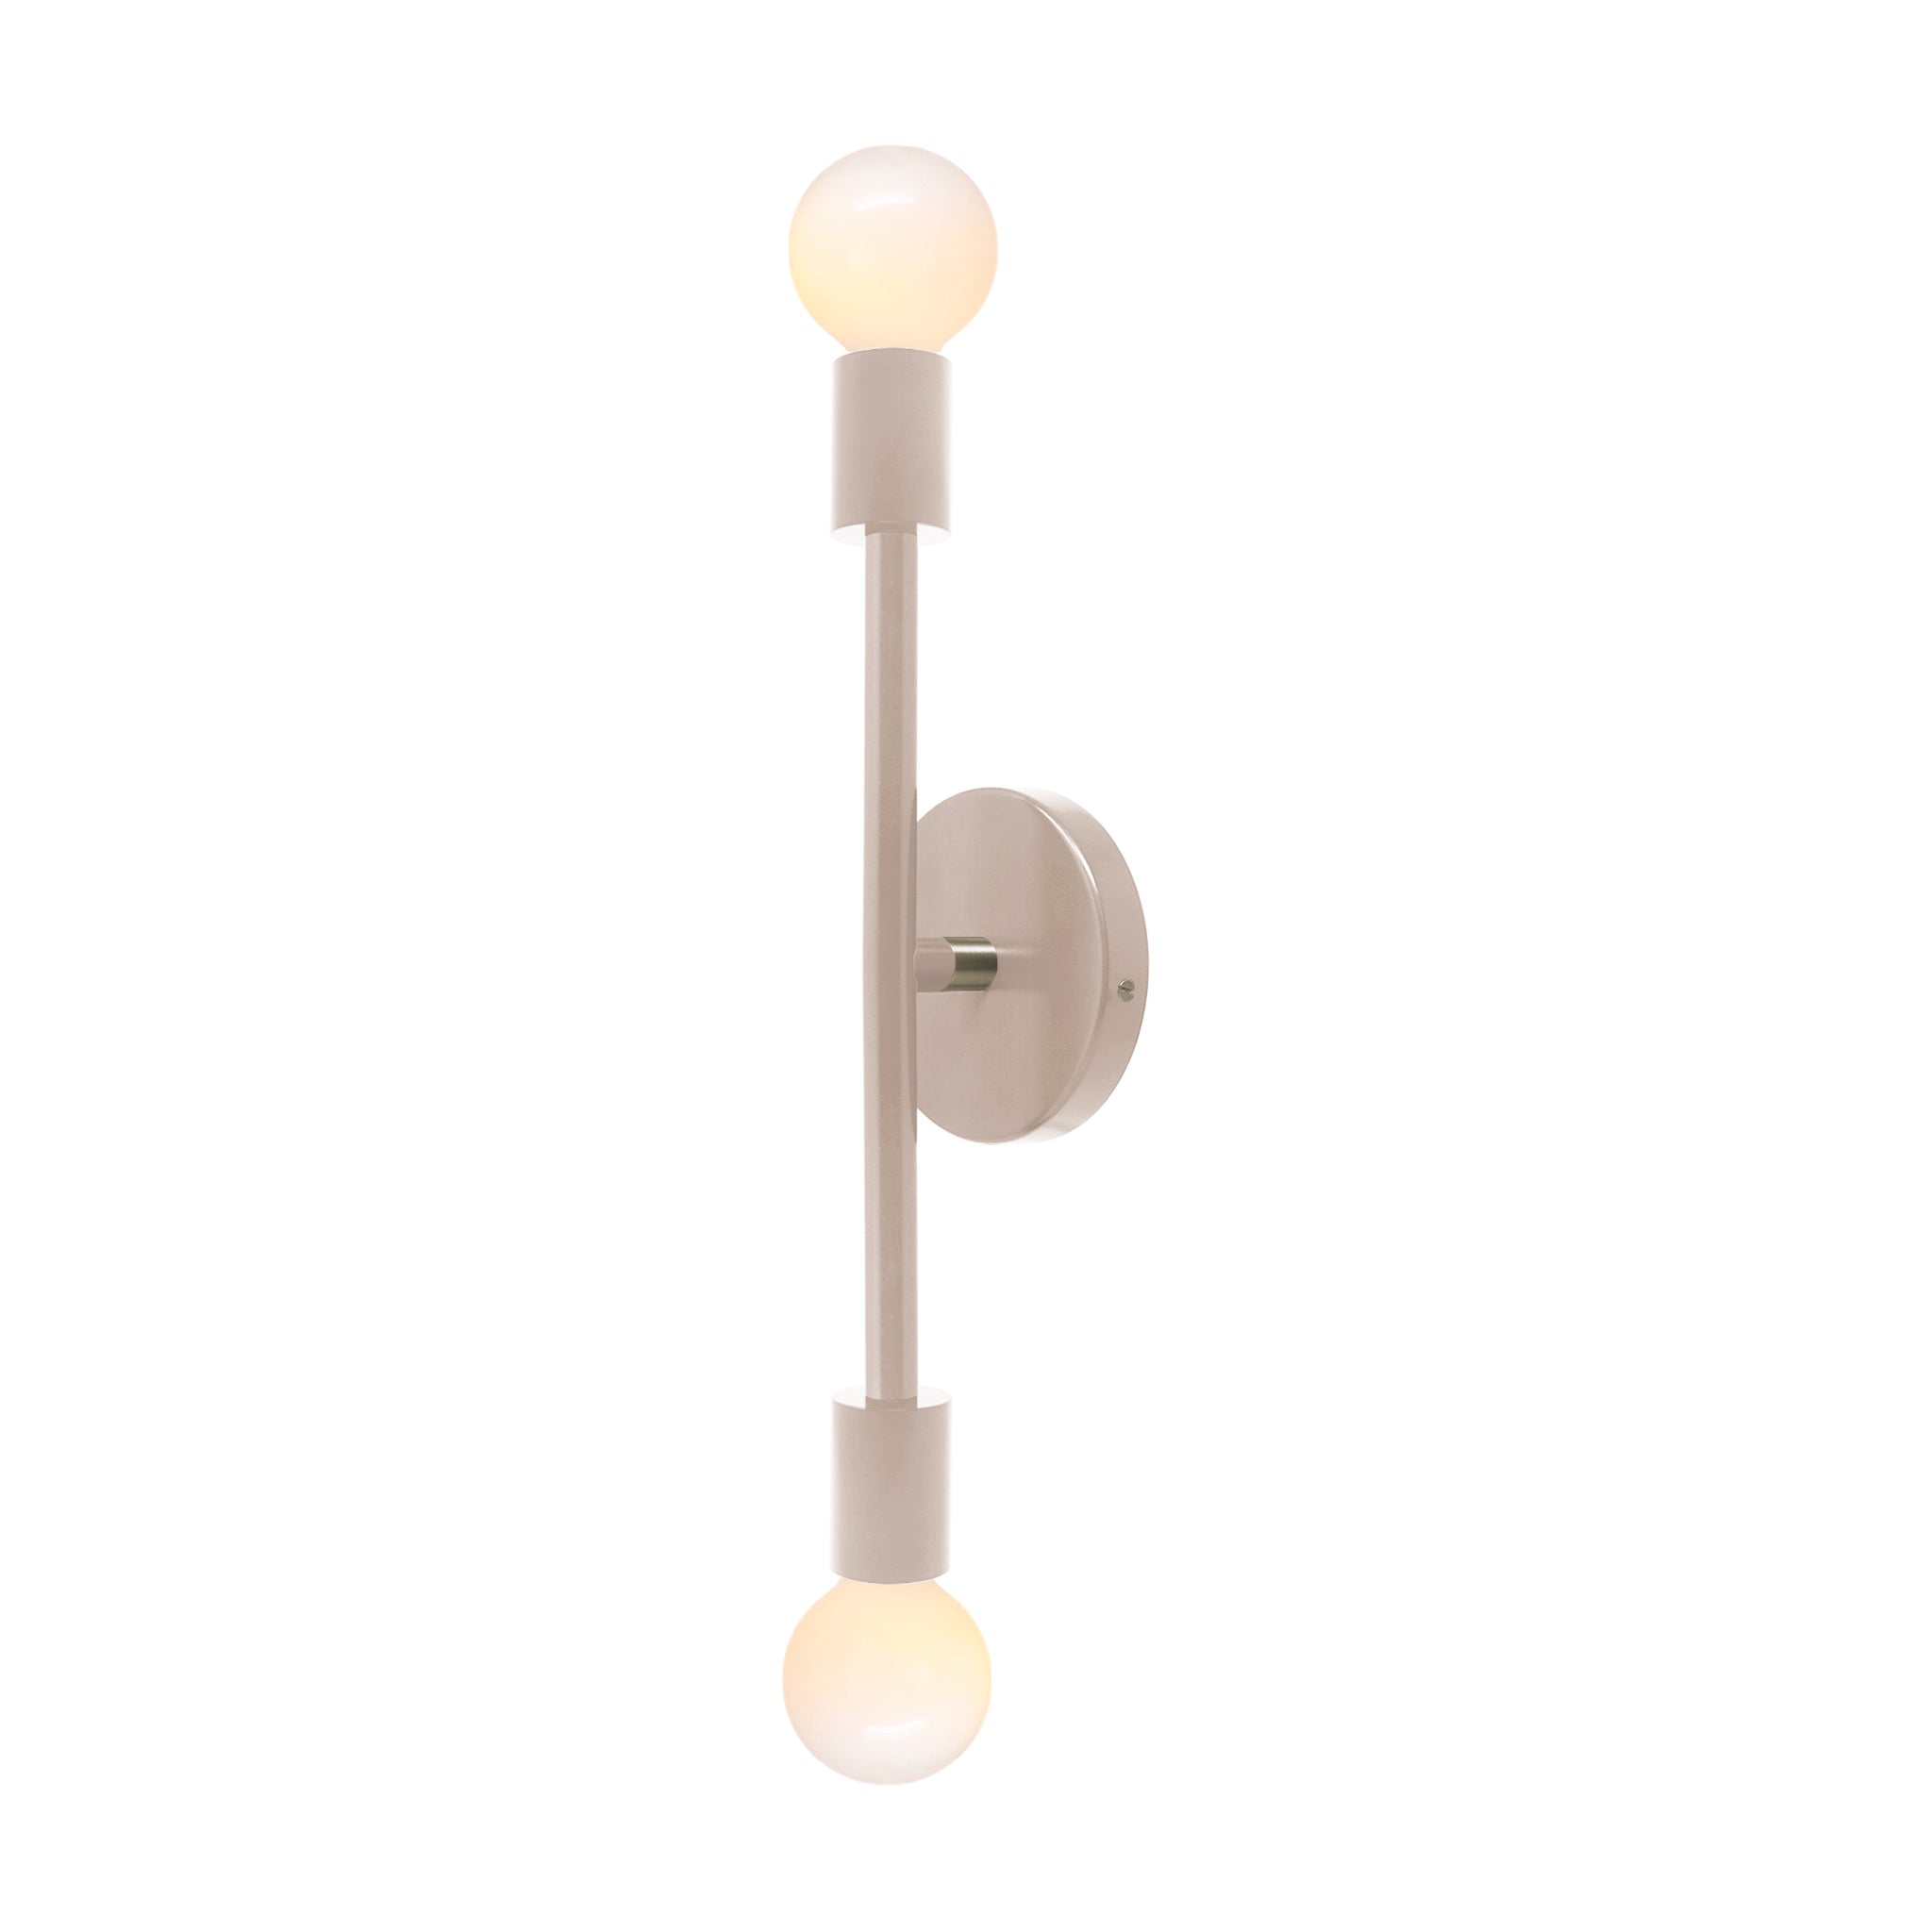 Nickel and barely color Pilot sconce 17" Dutton Brown lighting